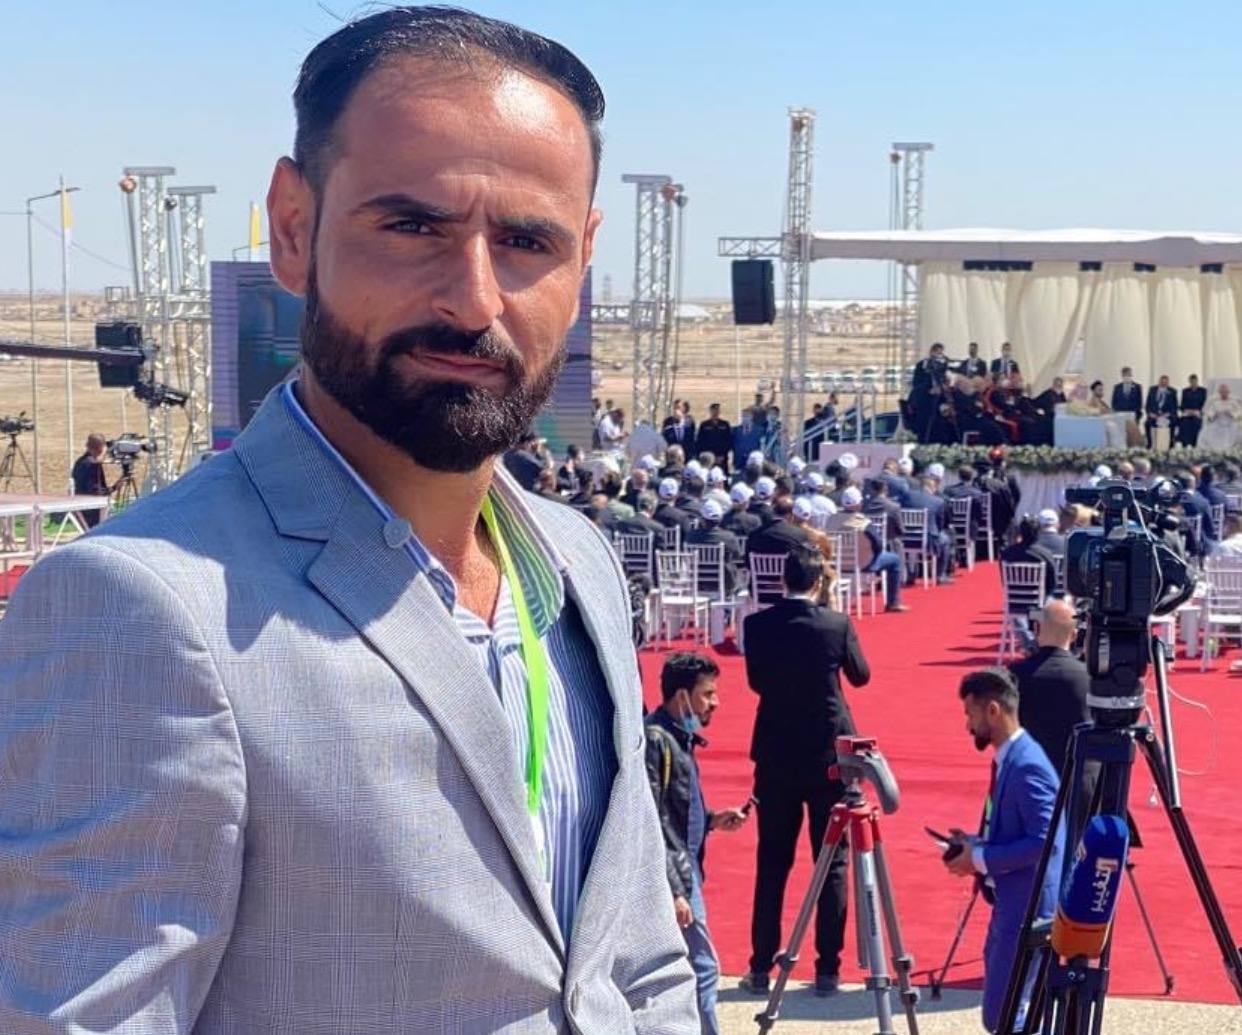 Reporter Fadel Al-Battat was assaulted by Grand Millennium Hotel security in Basra.